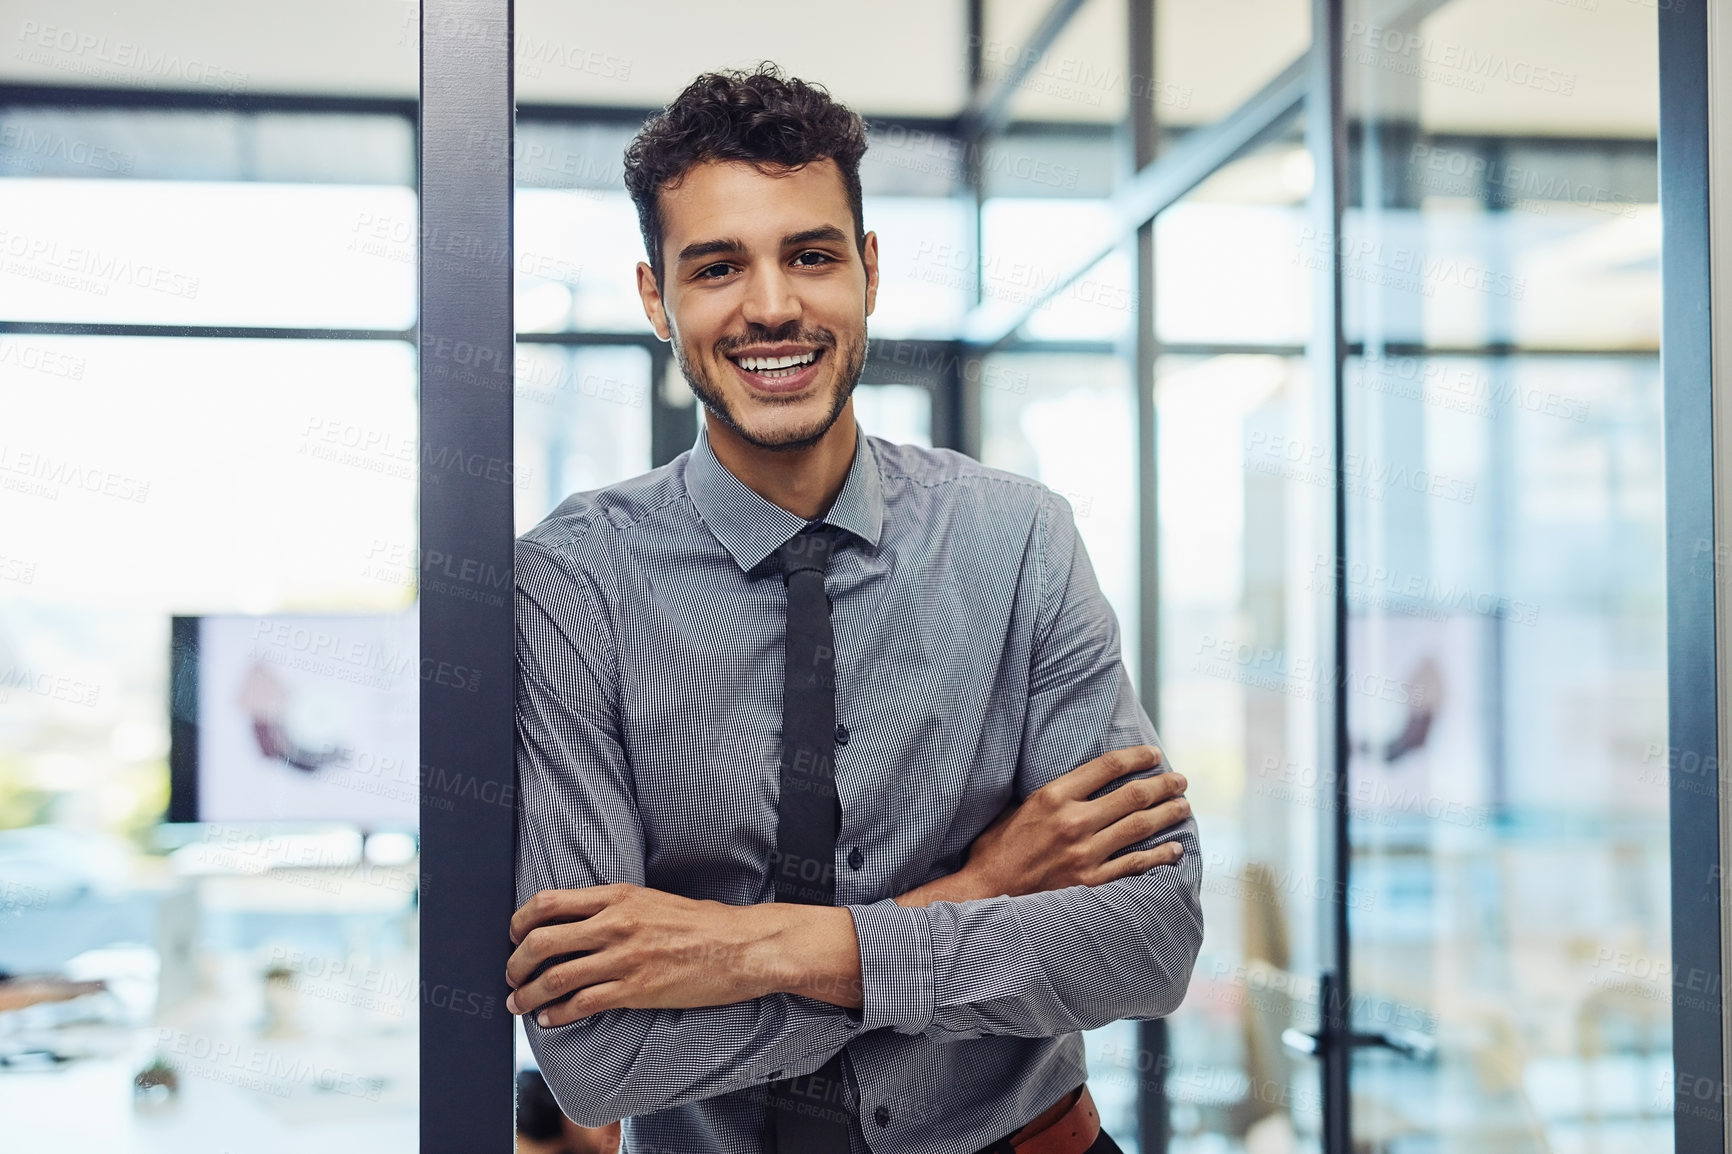 Buy stock photo Shot of a confident young businessman working in a modern office